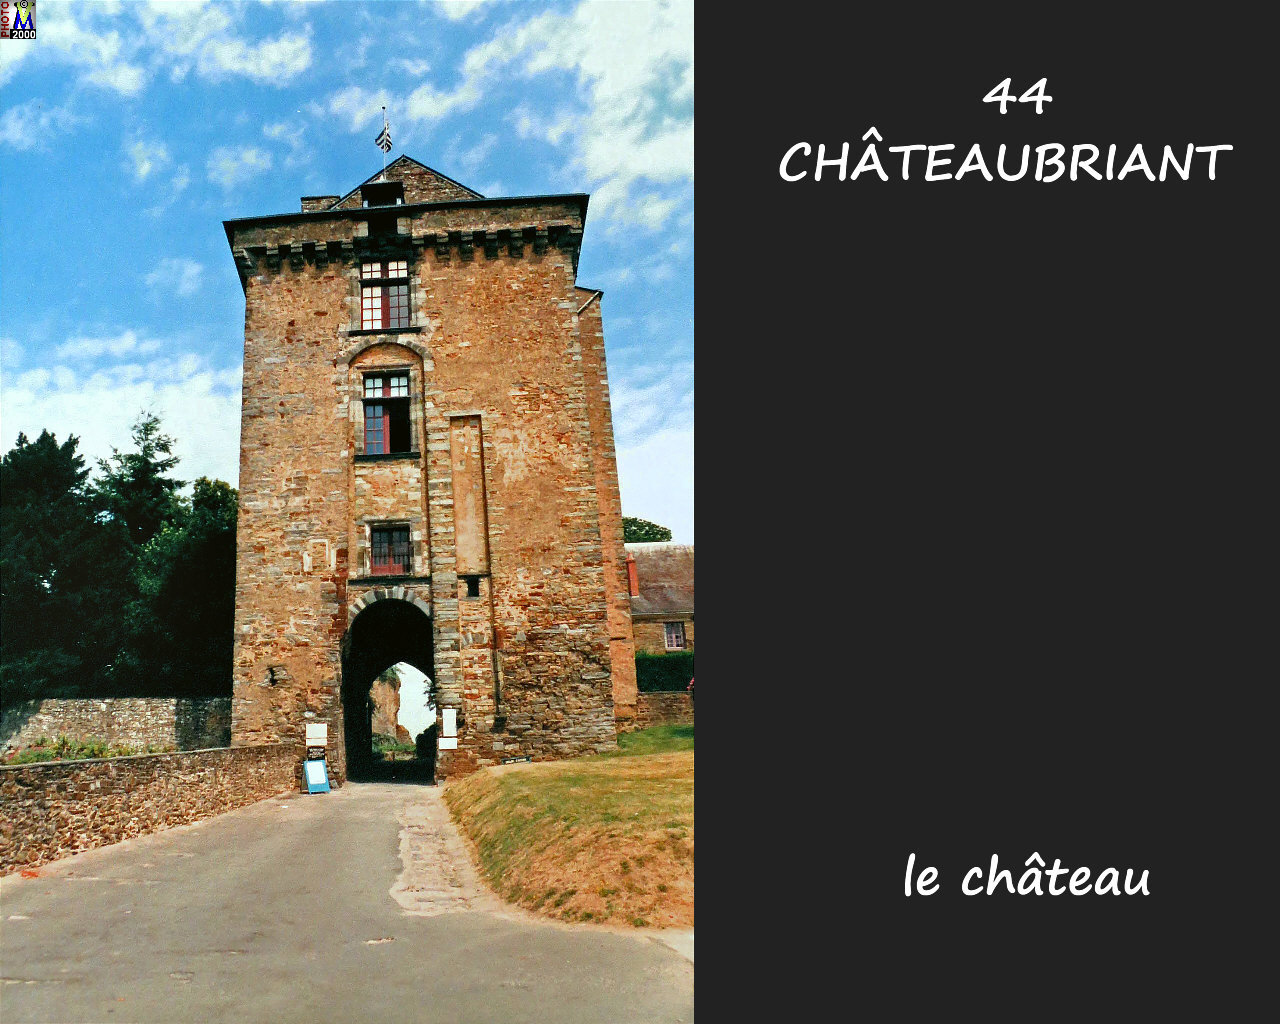 44CHATEAUBRIANT_chateau_104.jpg